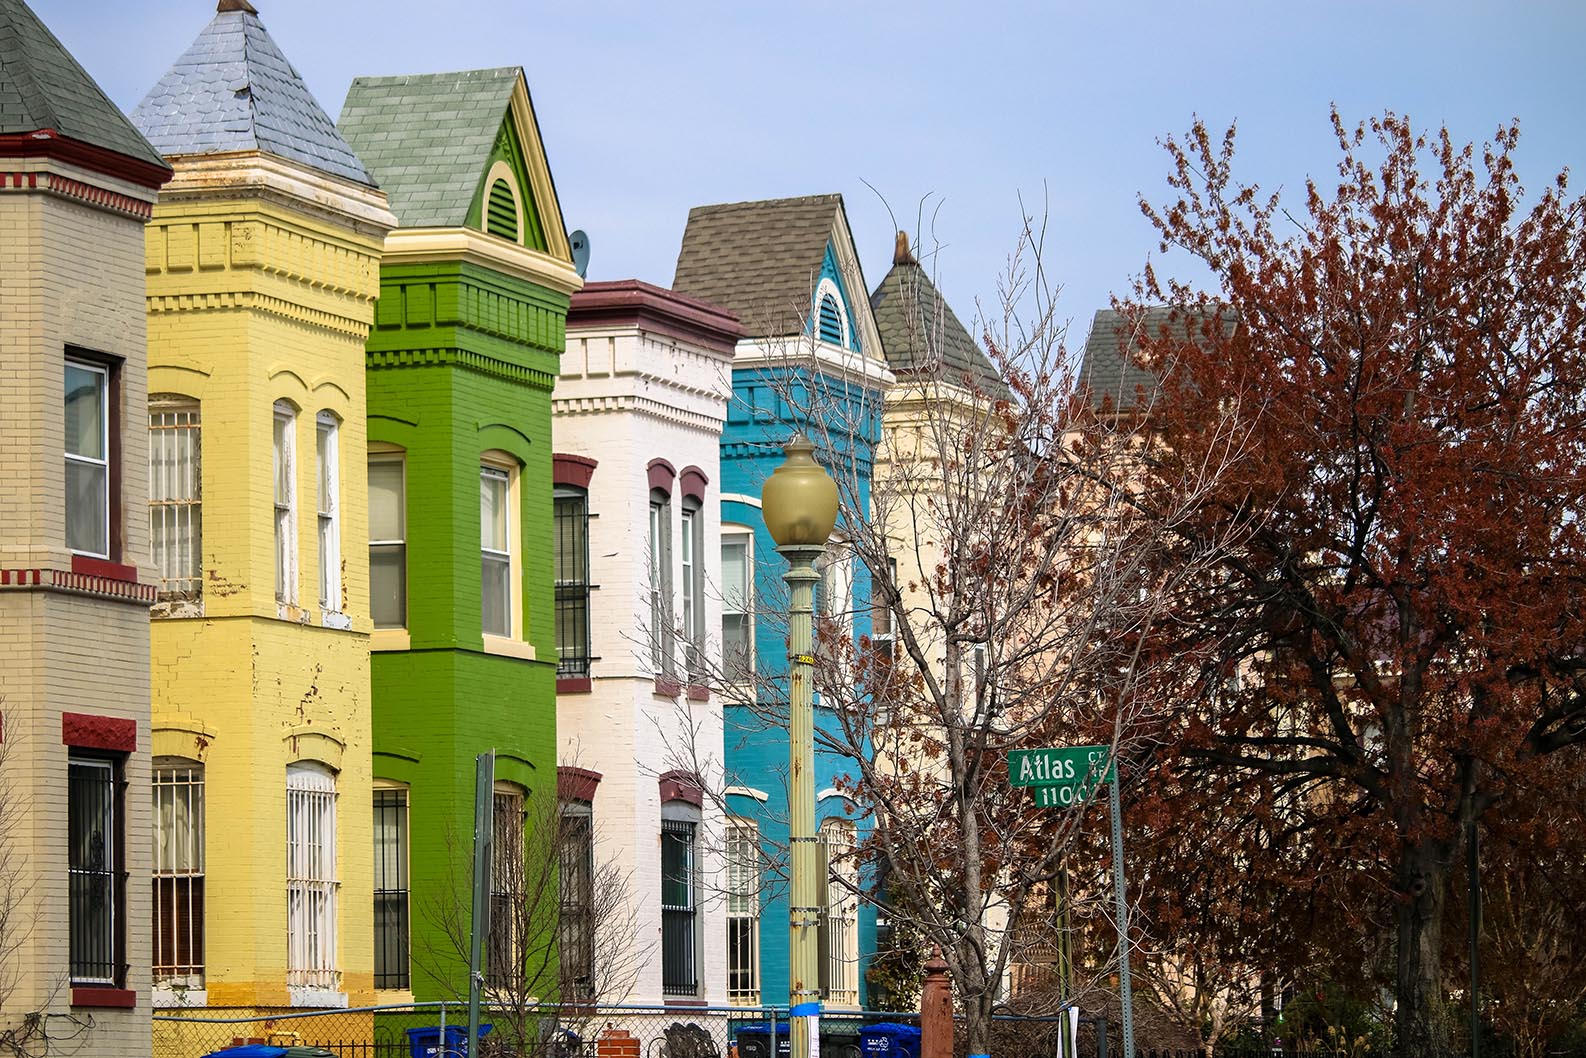 Colorful row houses in Atlas District, Washington, D.C.